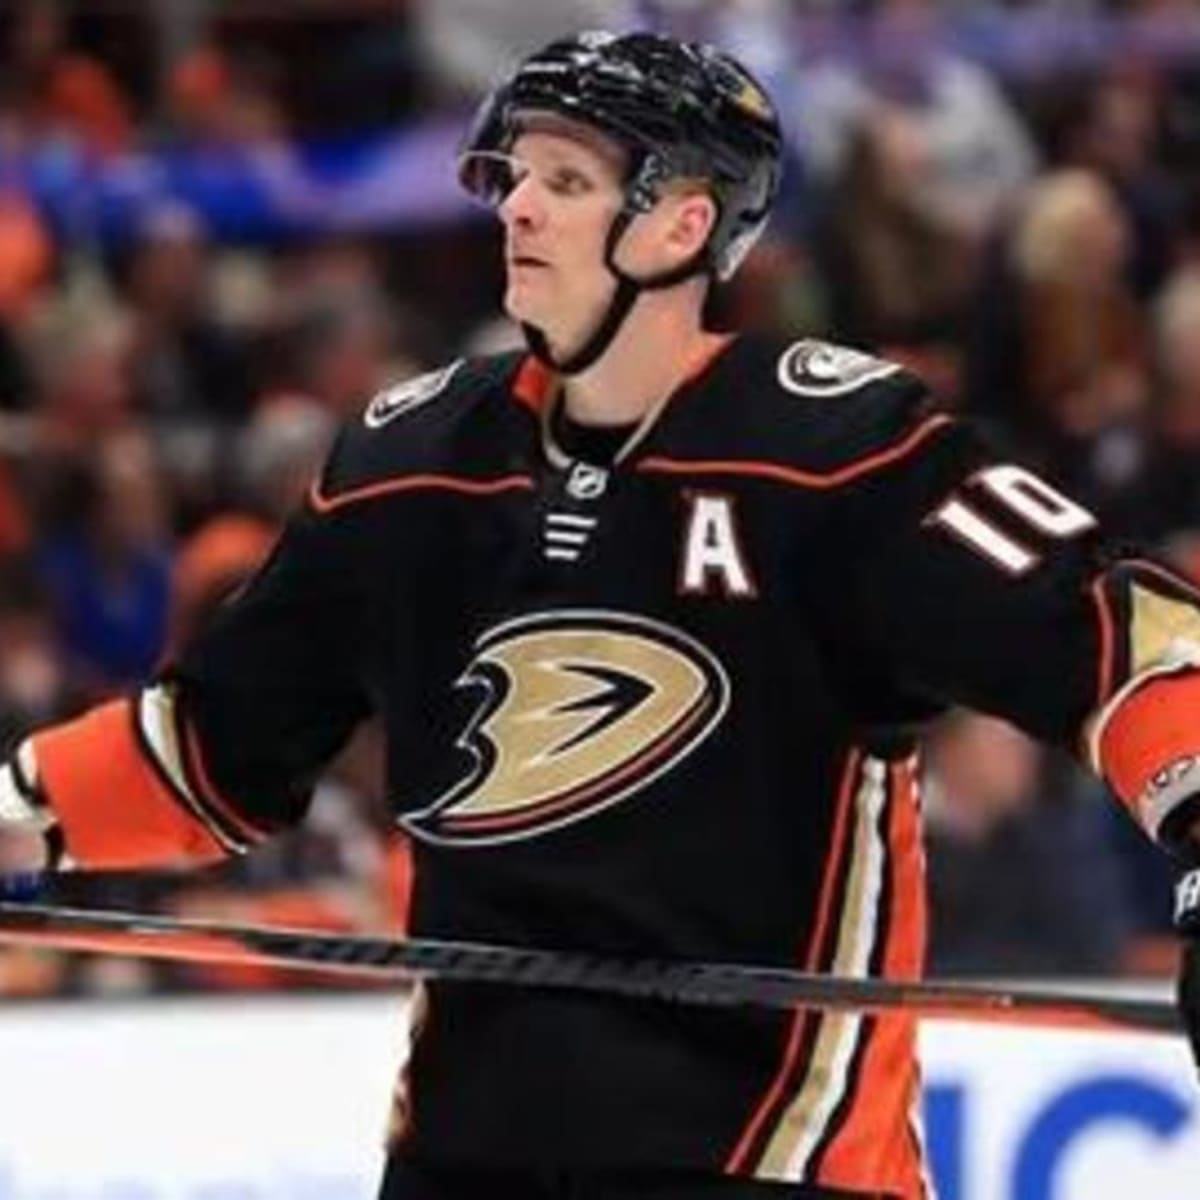 Anaheim Ducks: Corey Perry Out After Knee Surgery